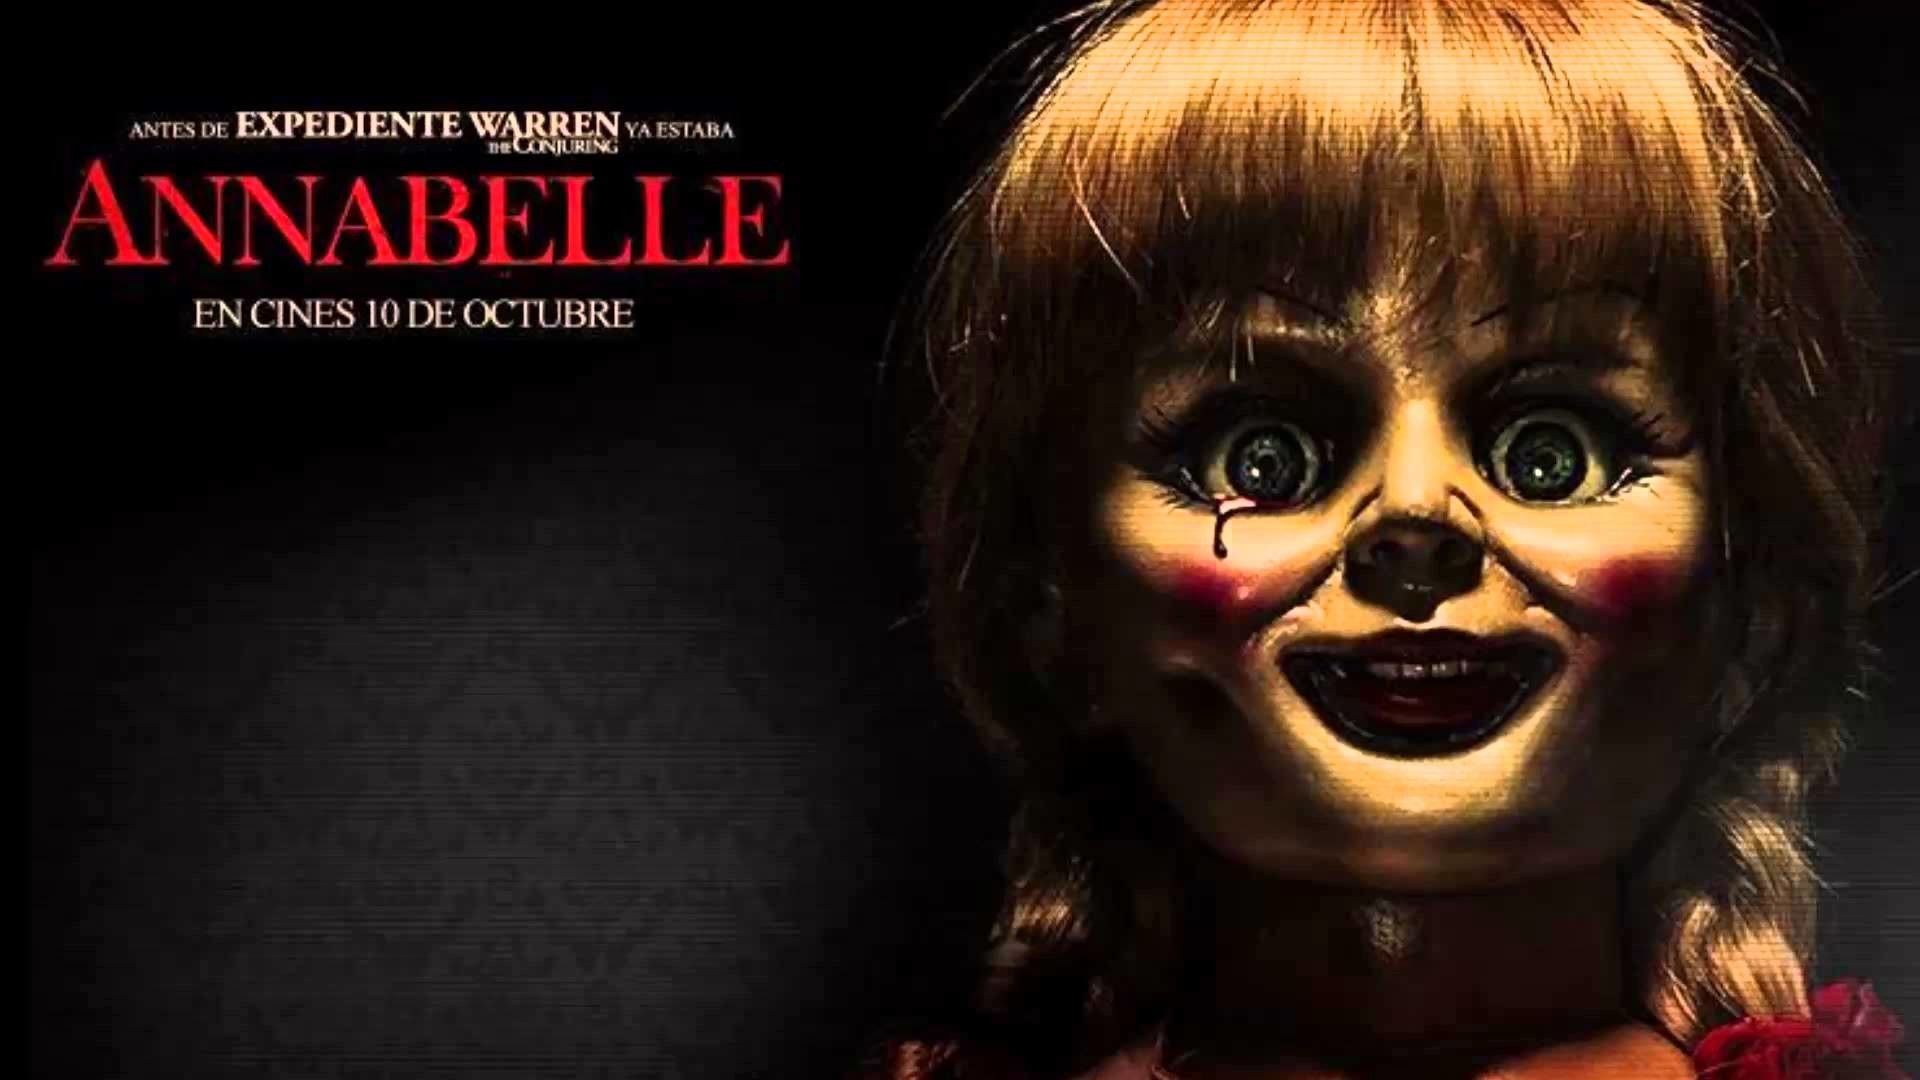 AnnaBelle wallpaper by F3R_Skins - Download on ZEDGE™ | ed01